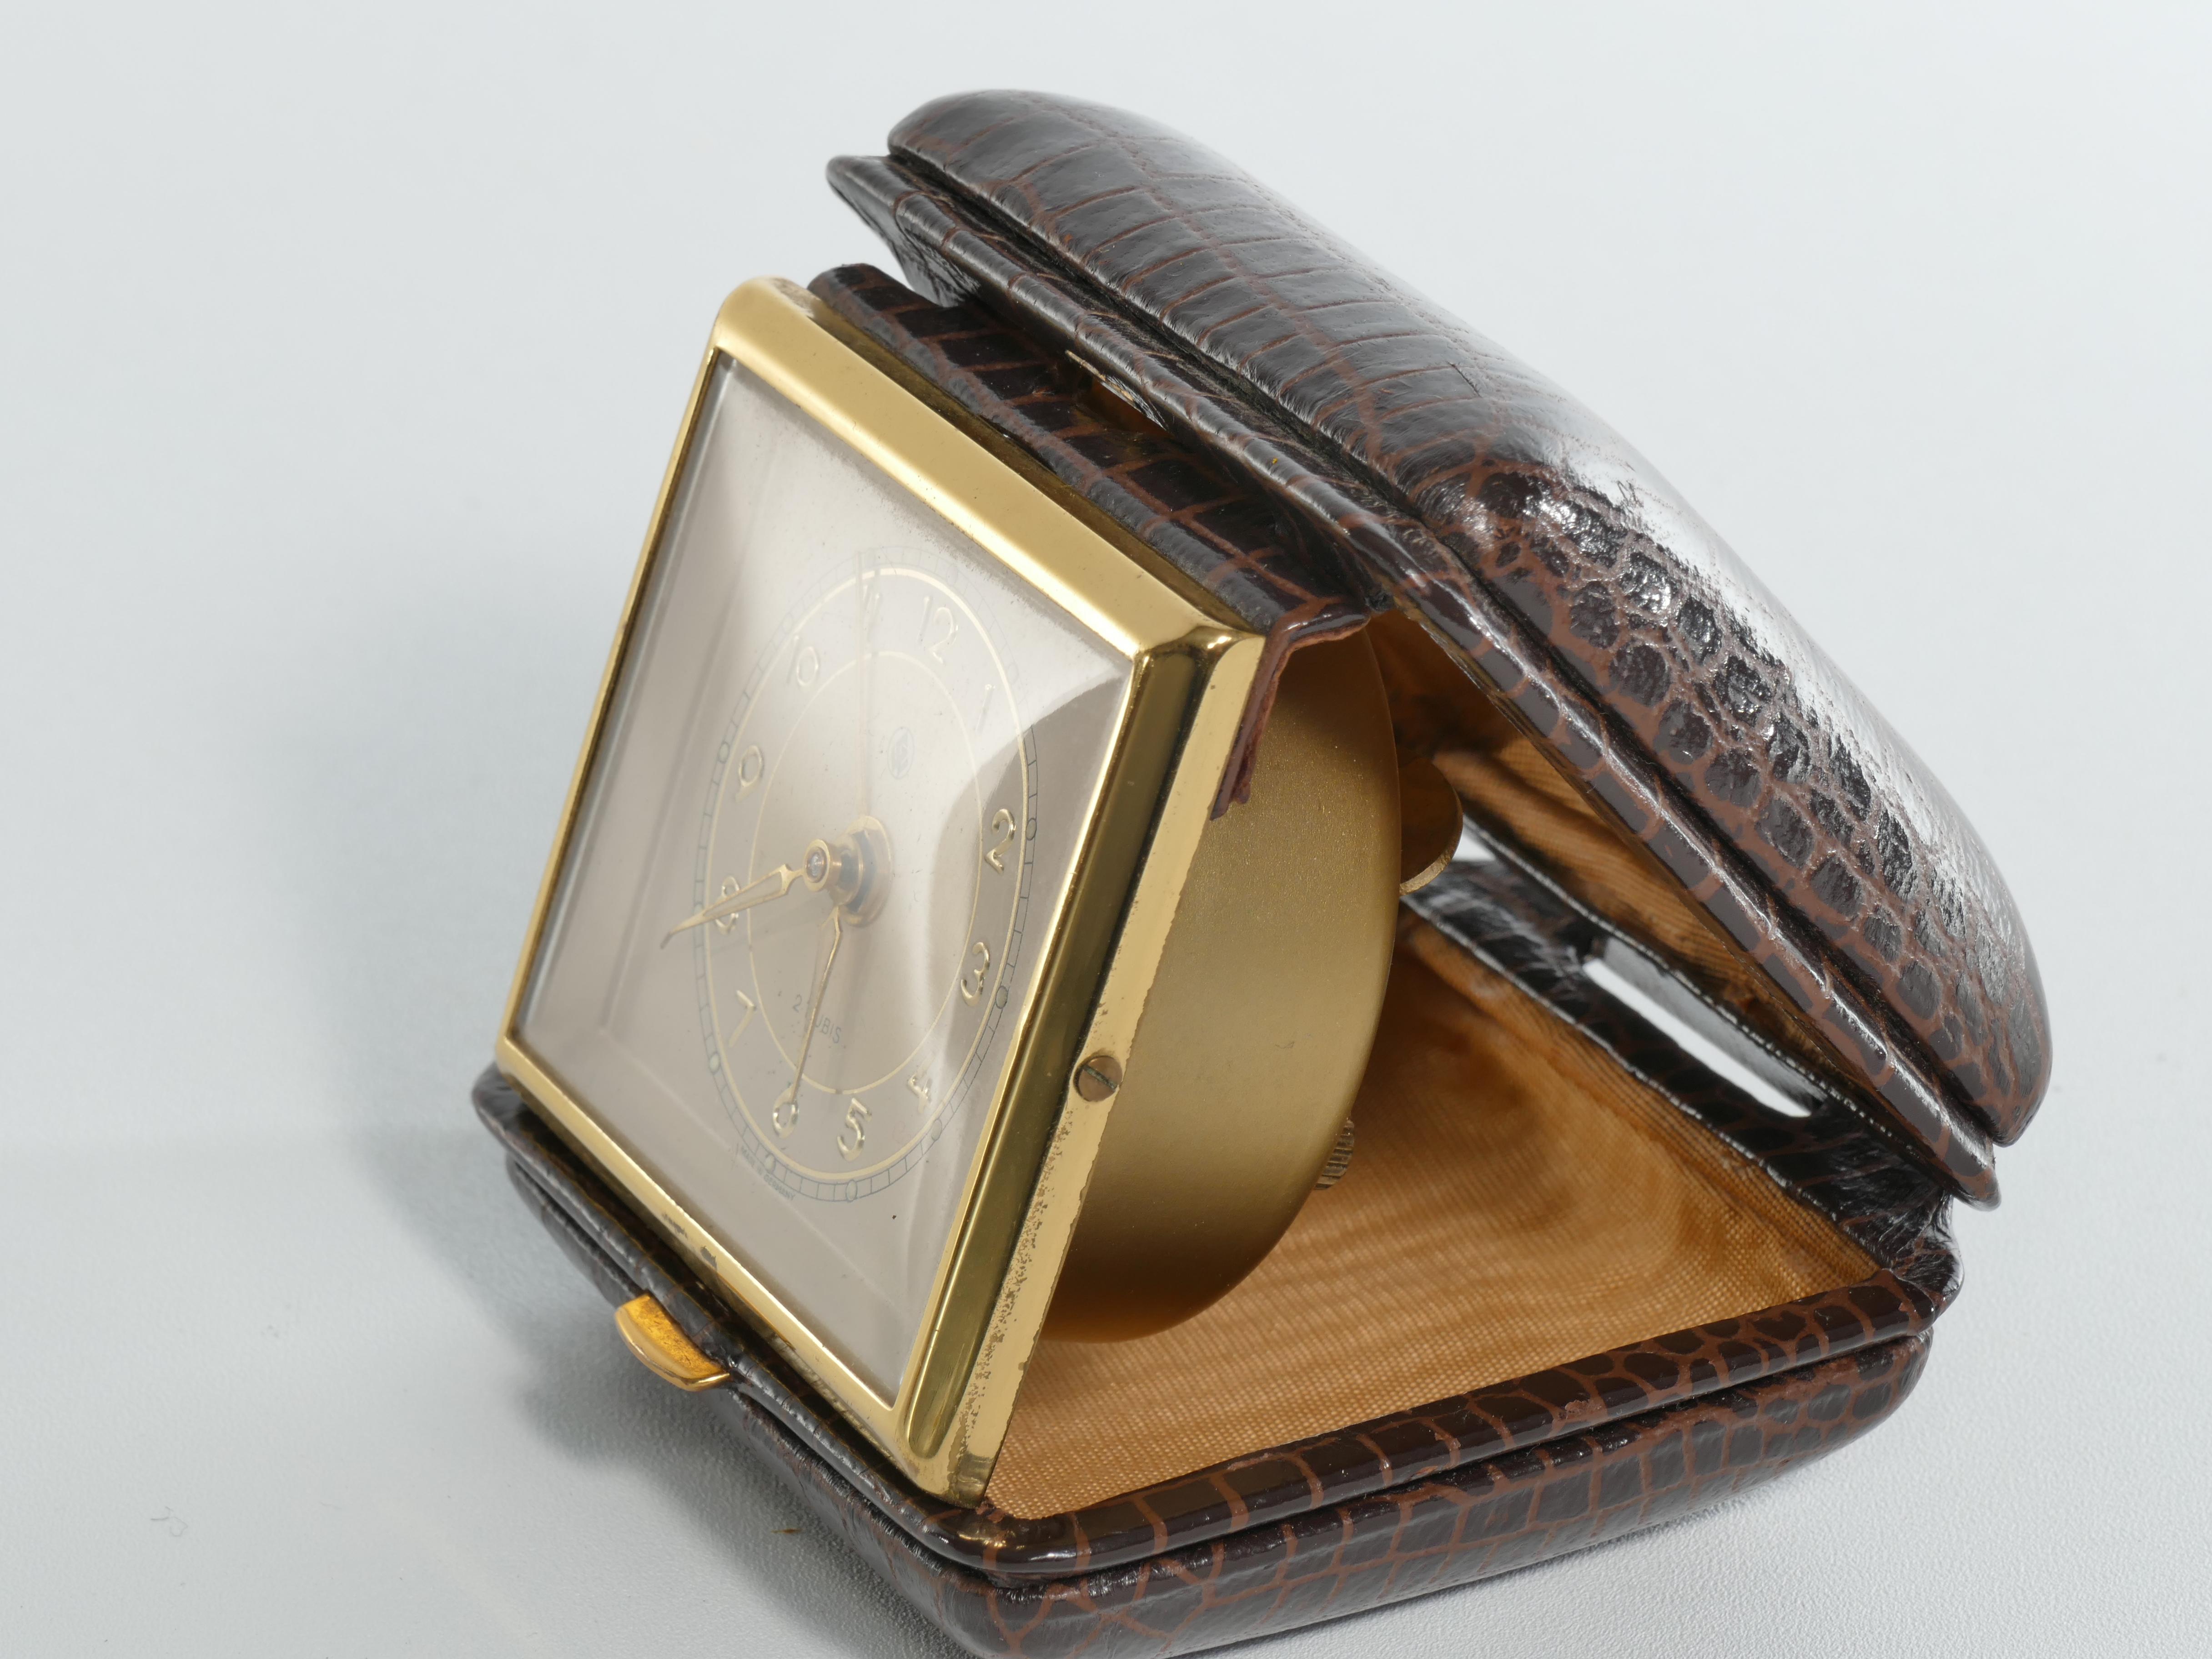 20th Century Travel Alarm Clock in Brass and Faux Snakeskin from 